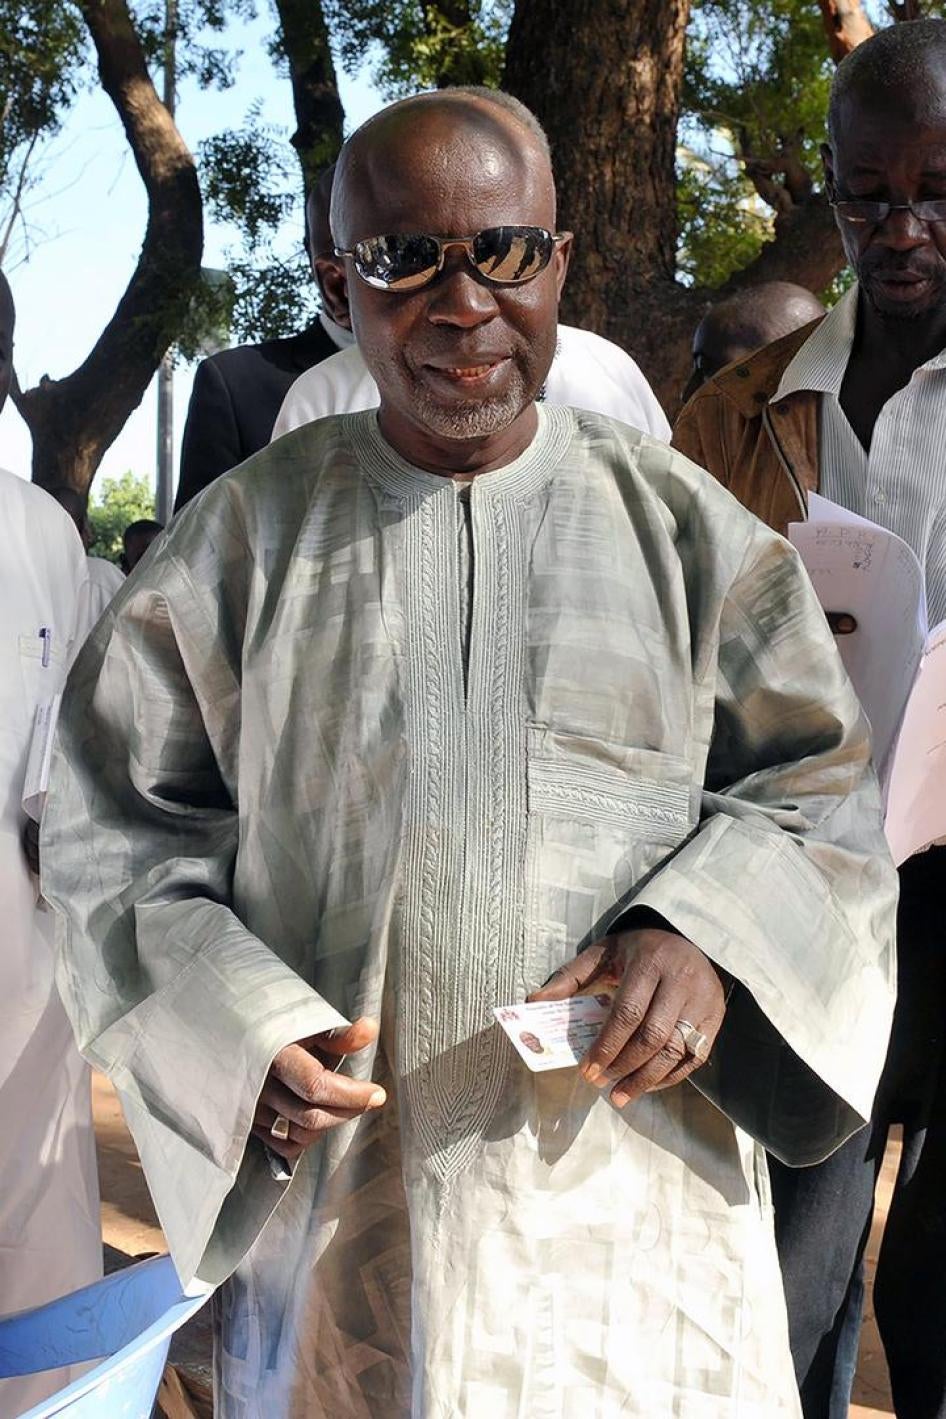 United Democratic Party (UDP) leader Ousainou Darboe votes at a polling station outside Banjul during the 2011 presidential elections, November 24, 2011. 